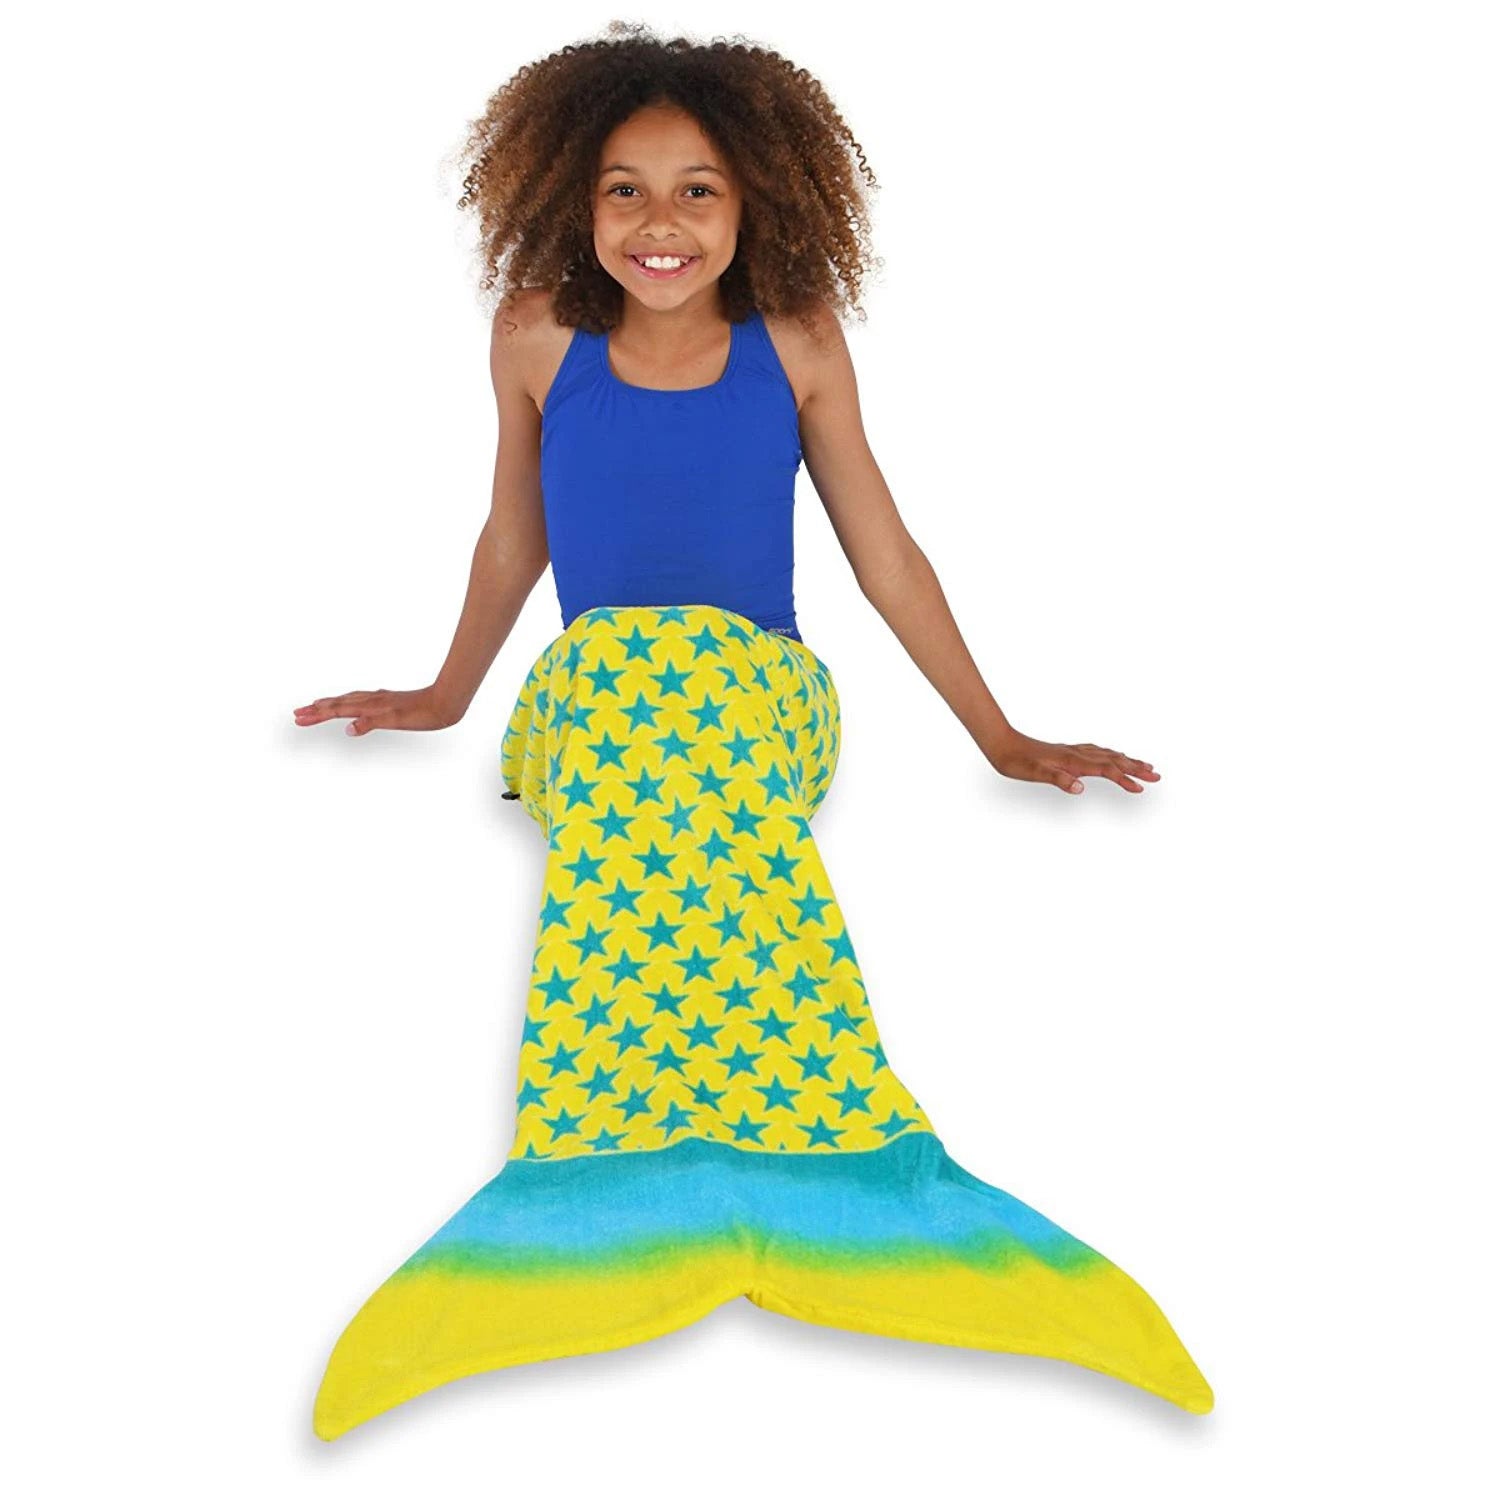 Toweltails 100% Cotton Towel for Boys and Girls 55" Long Perfect for The Beach Pool or Bath